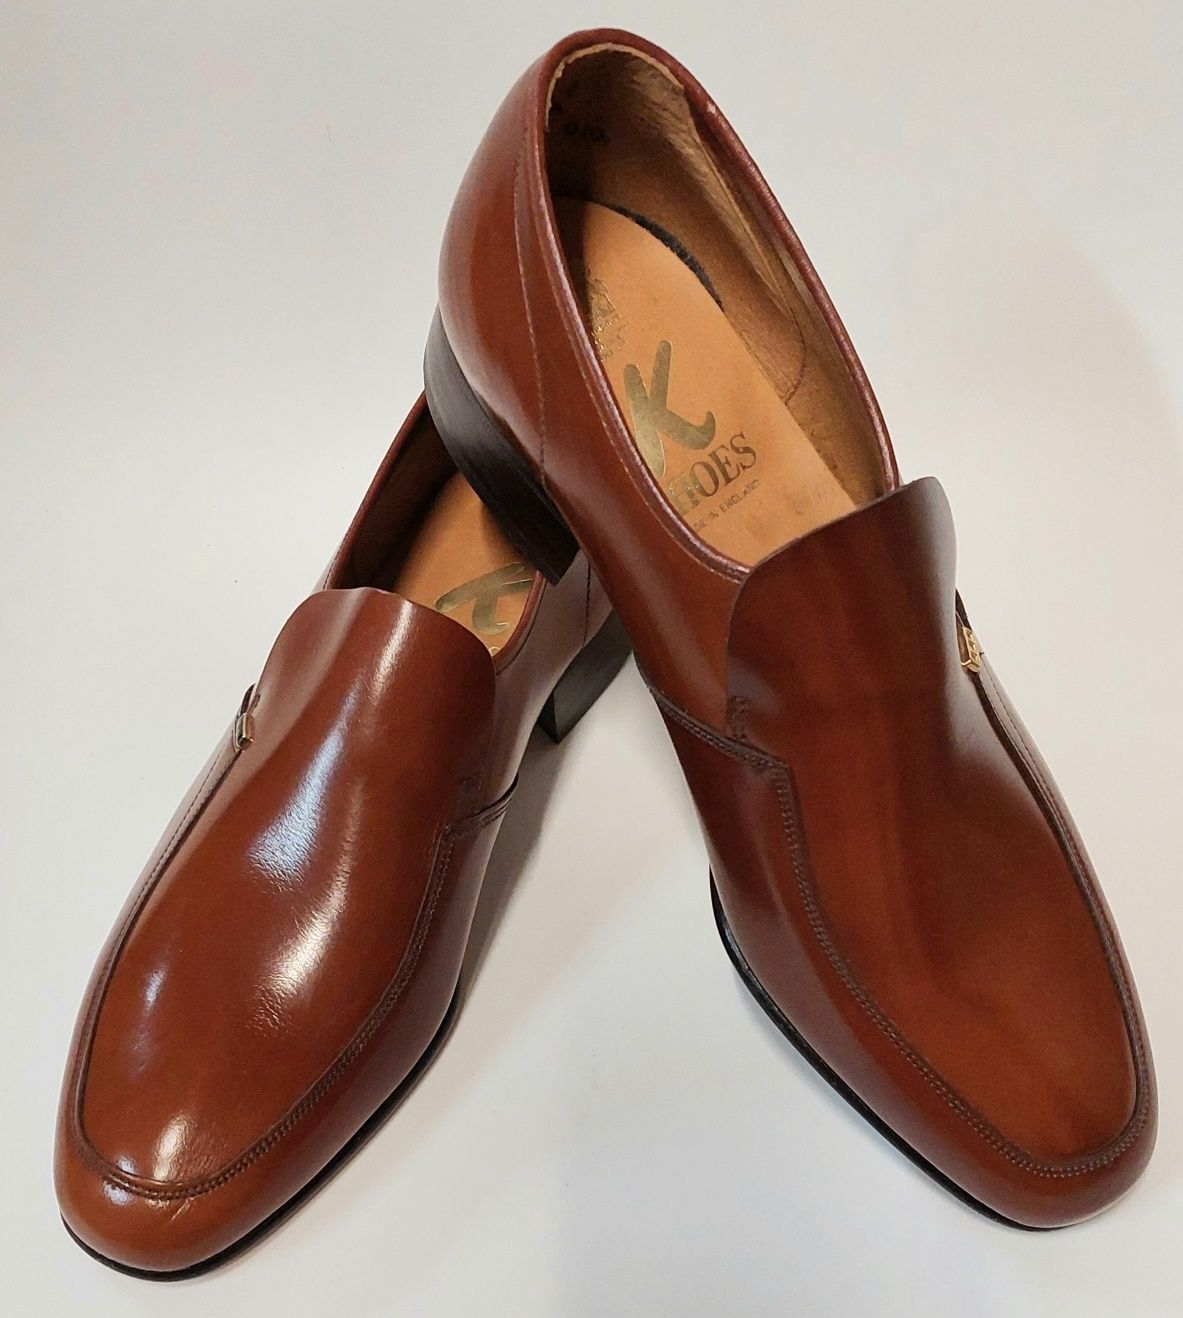 Buty K Shoes Loafers roz.40 Made in England  skóra naturalna